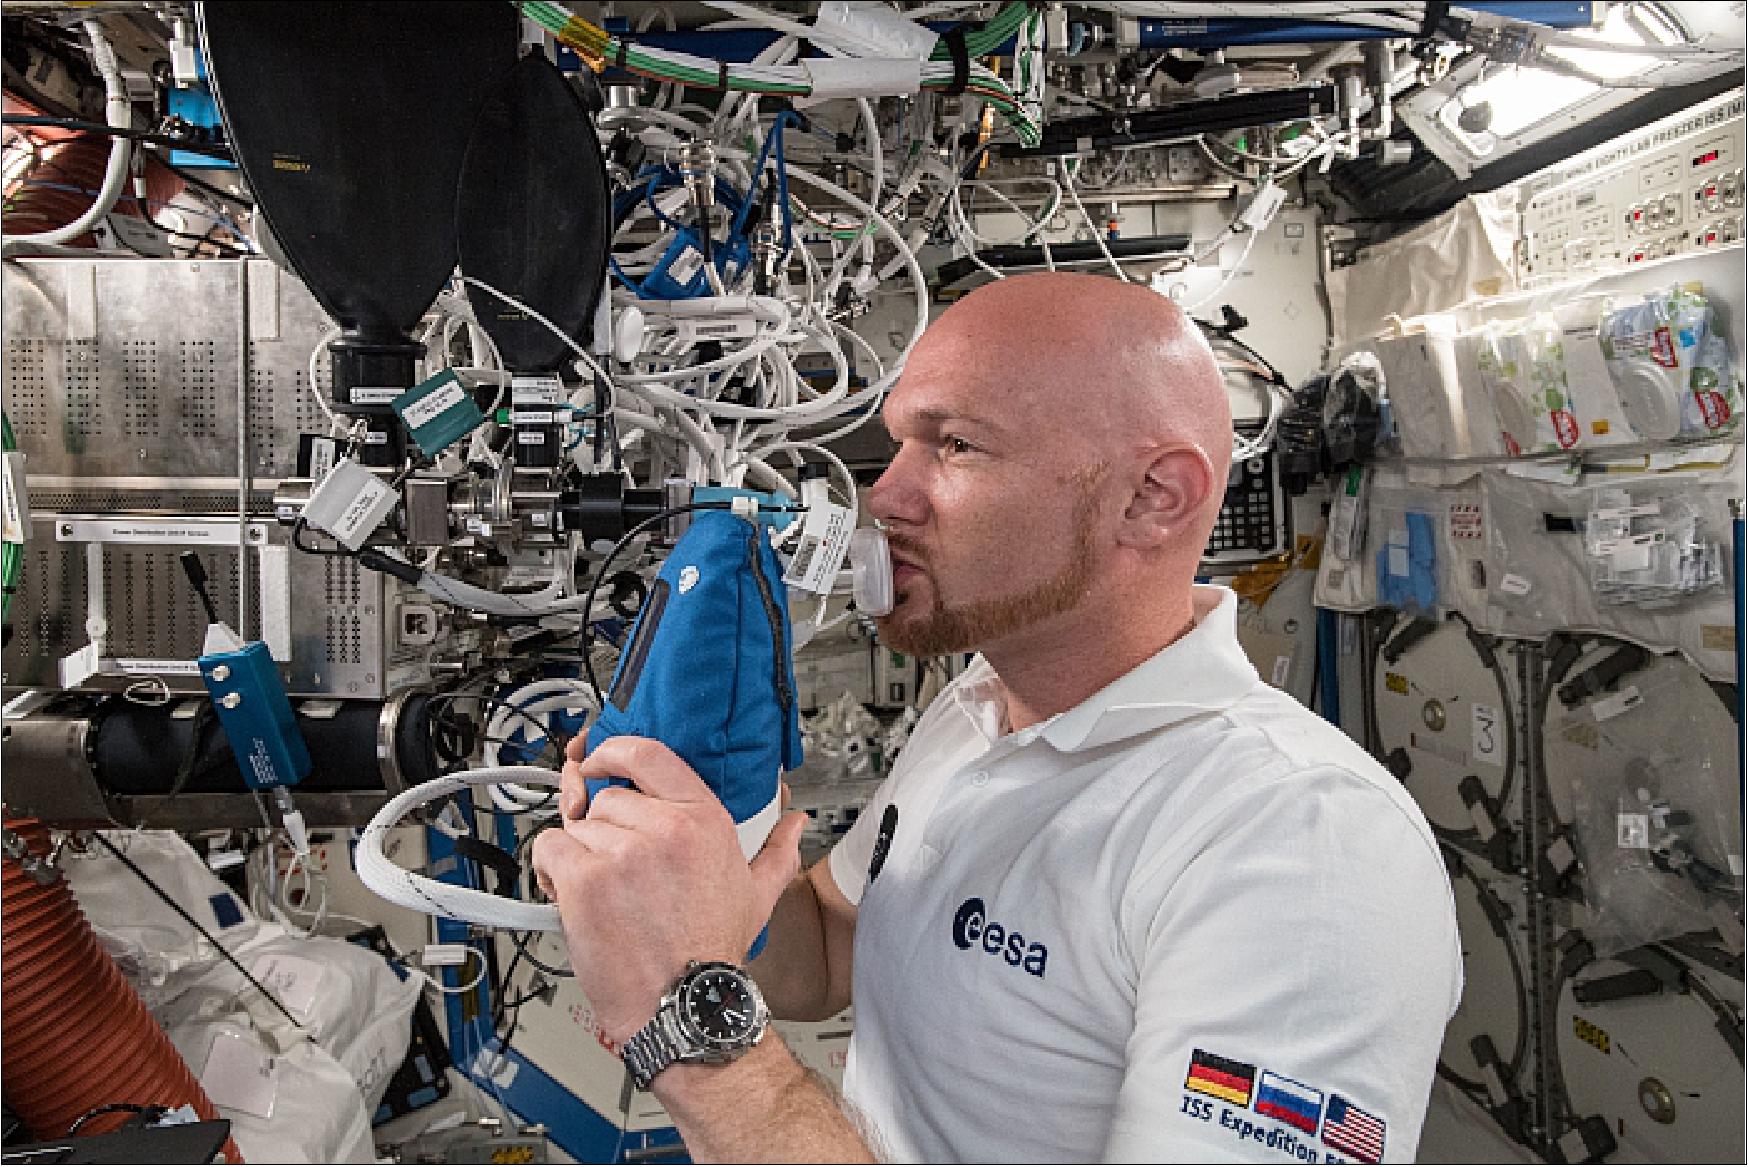 Figure 49: ESA (European Space Agency) astronaut Alexander Gerst exhales into an ultra-sensitive gas analyzer for the Airway Monitoring experiment, a study of airway inflammation in crew members. Results help flight surgeons plan safer long-term missions to the Moon and Mars and may help patients on Earth with asthma or other airway inflammatory diseases (image credit: NASA)